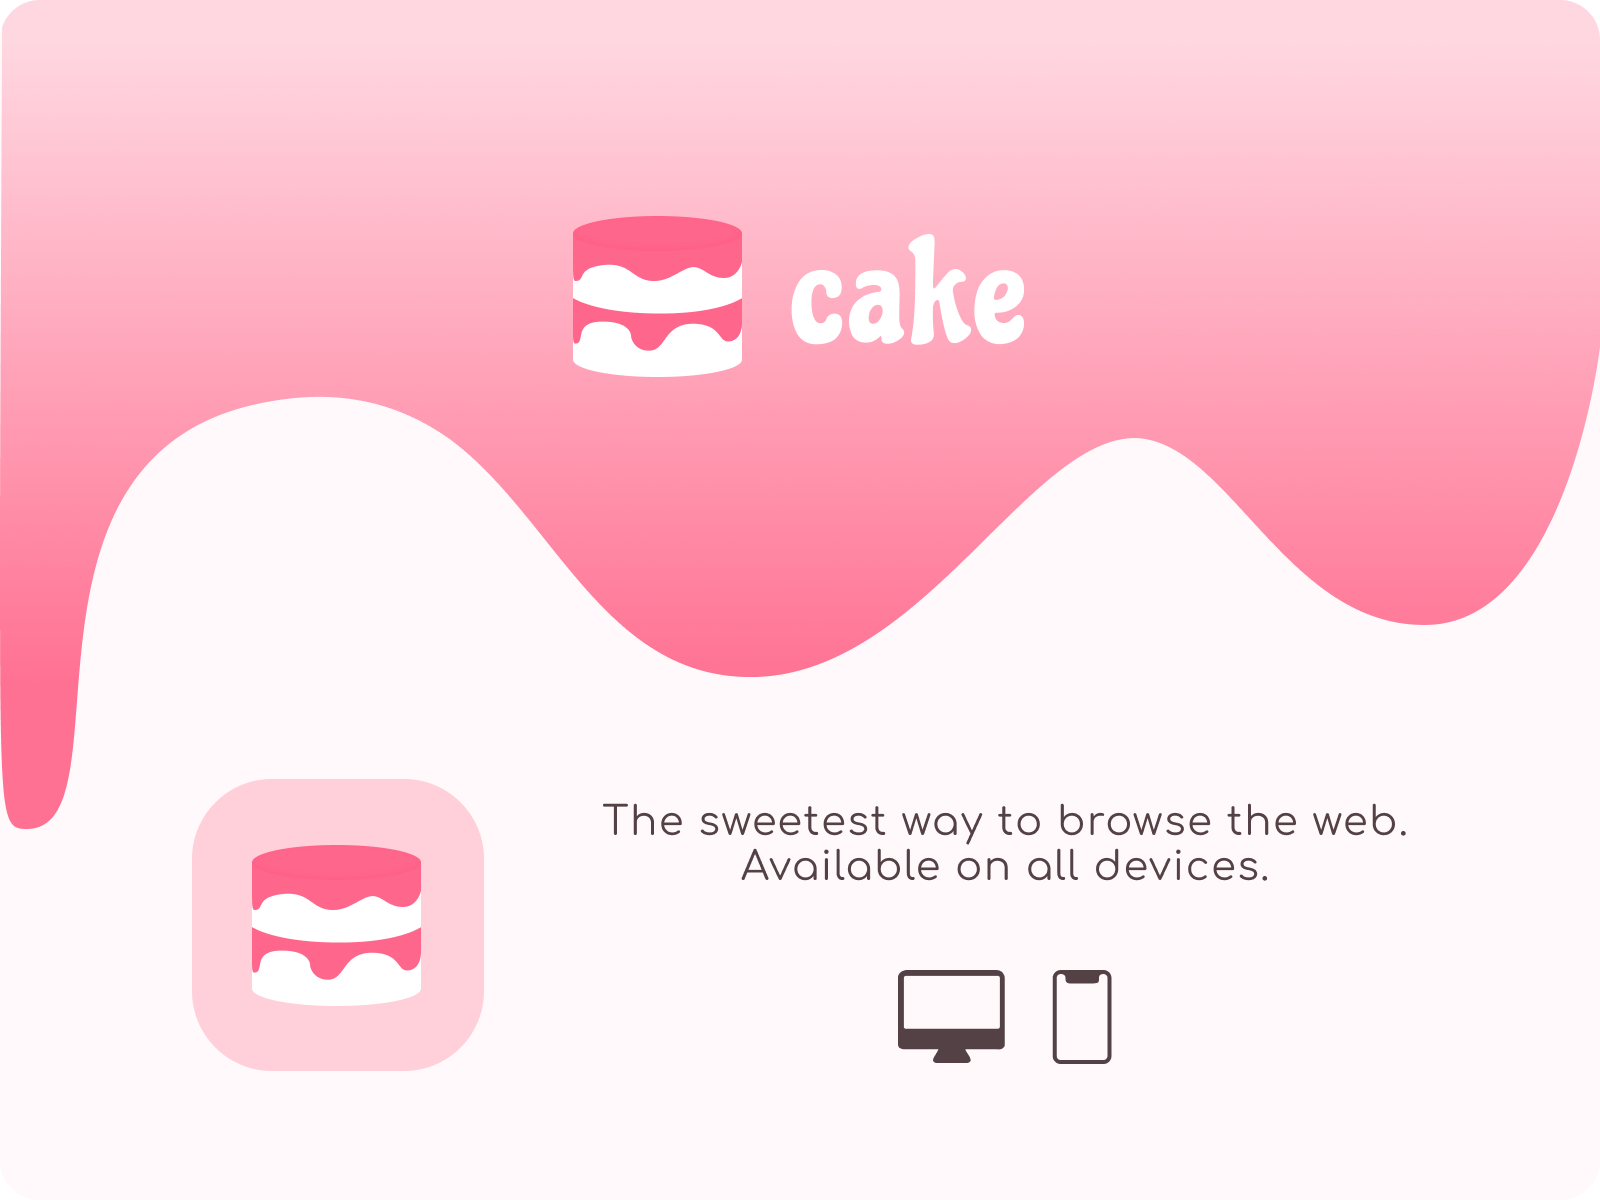 Cake Web Browser is a new browser that's worth checking out